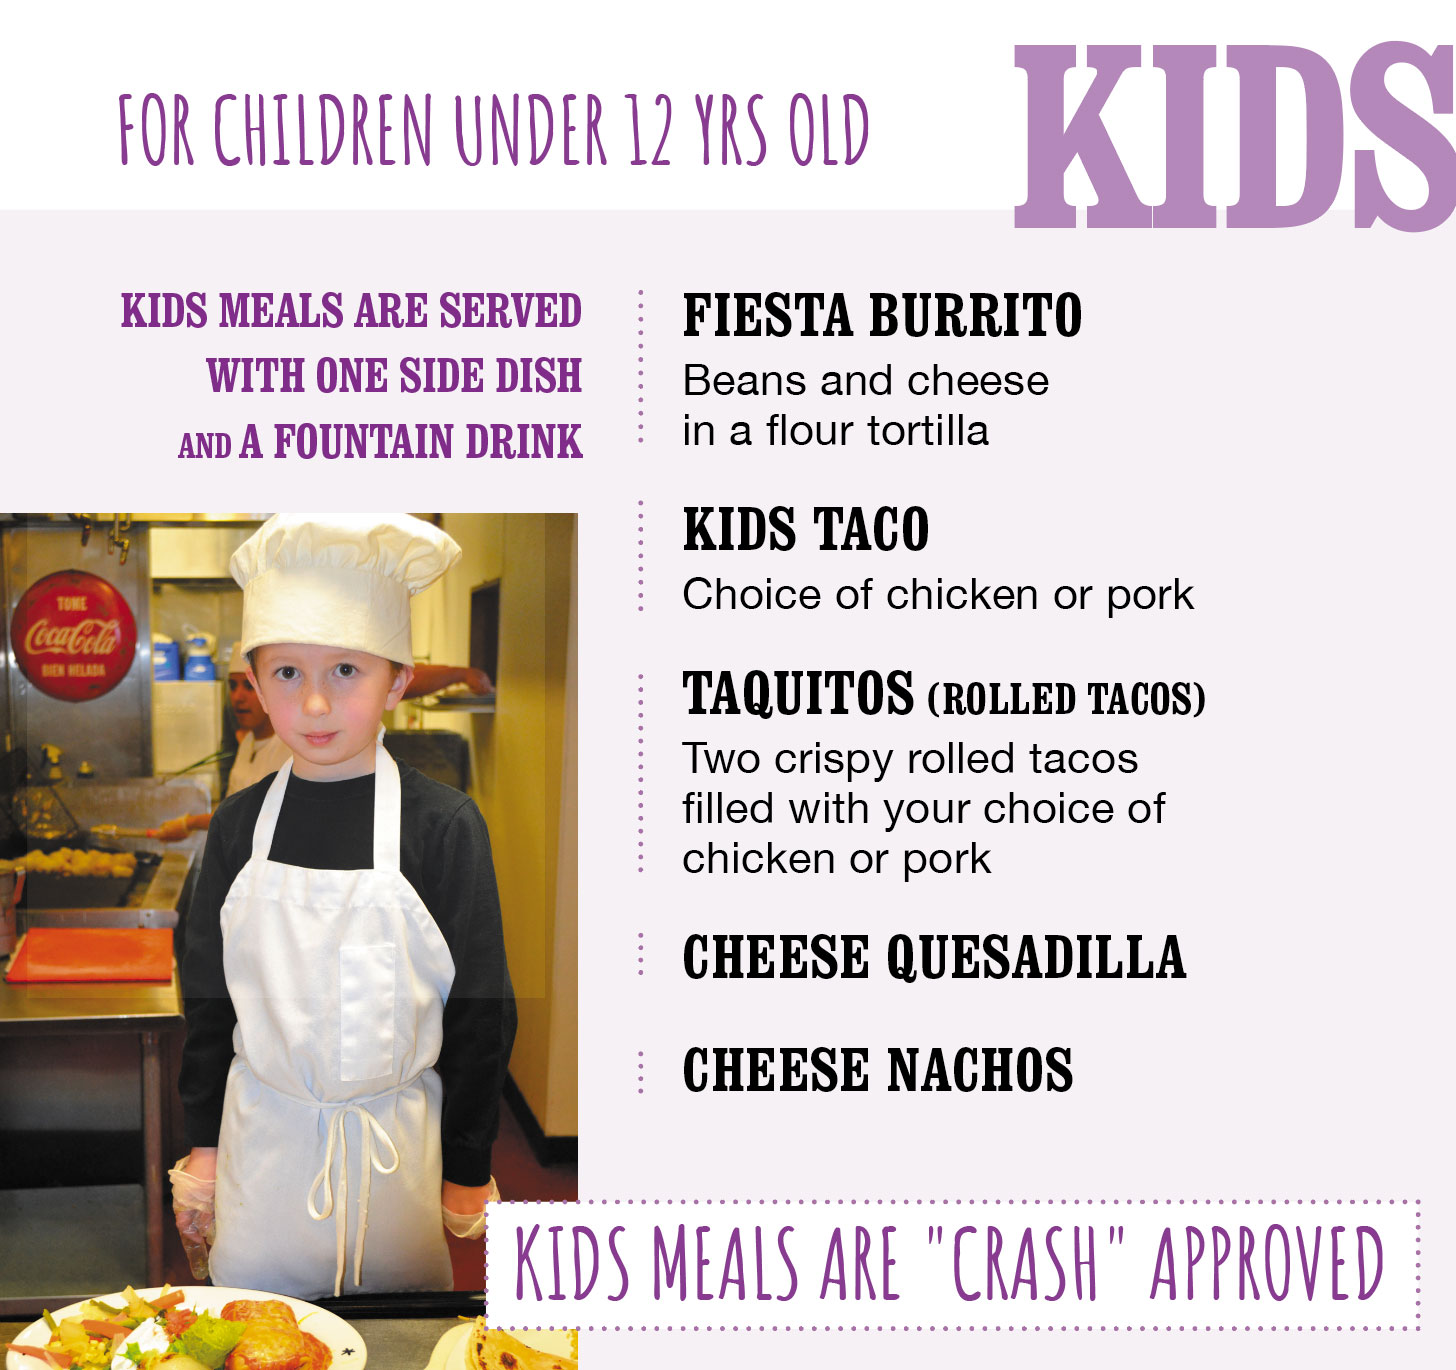 Milagros Mexican food is the best for kids too!